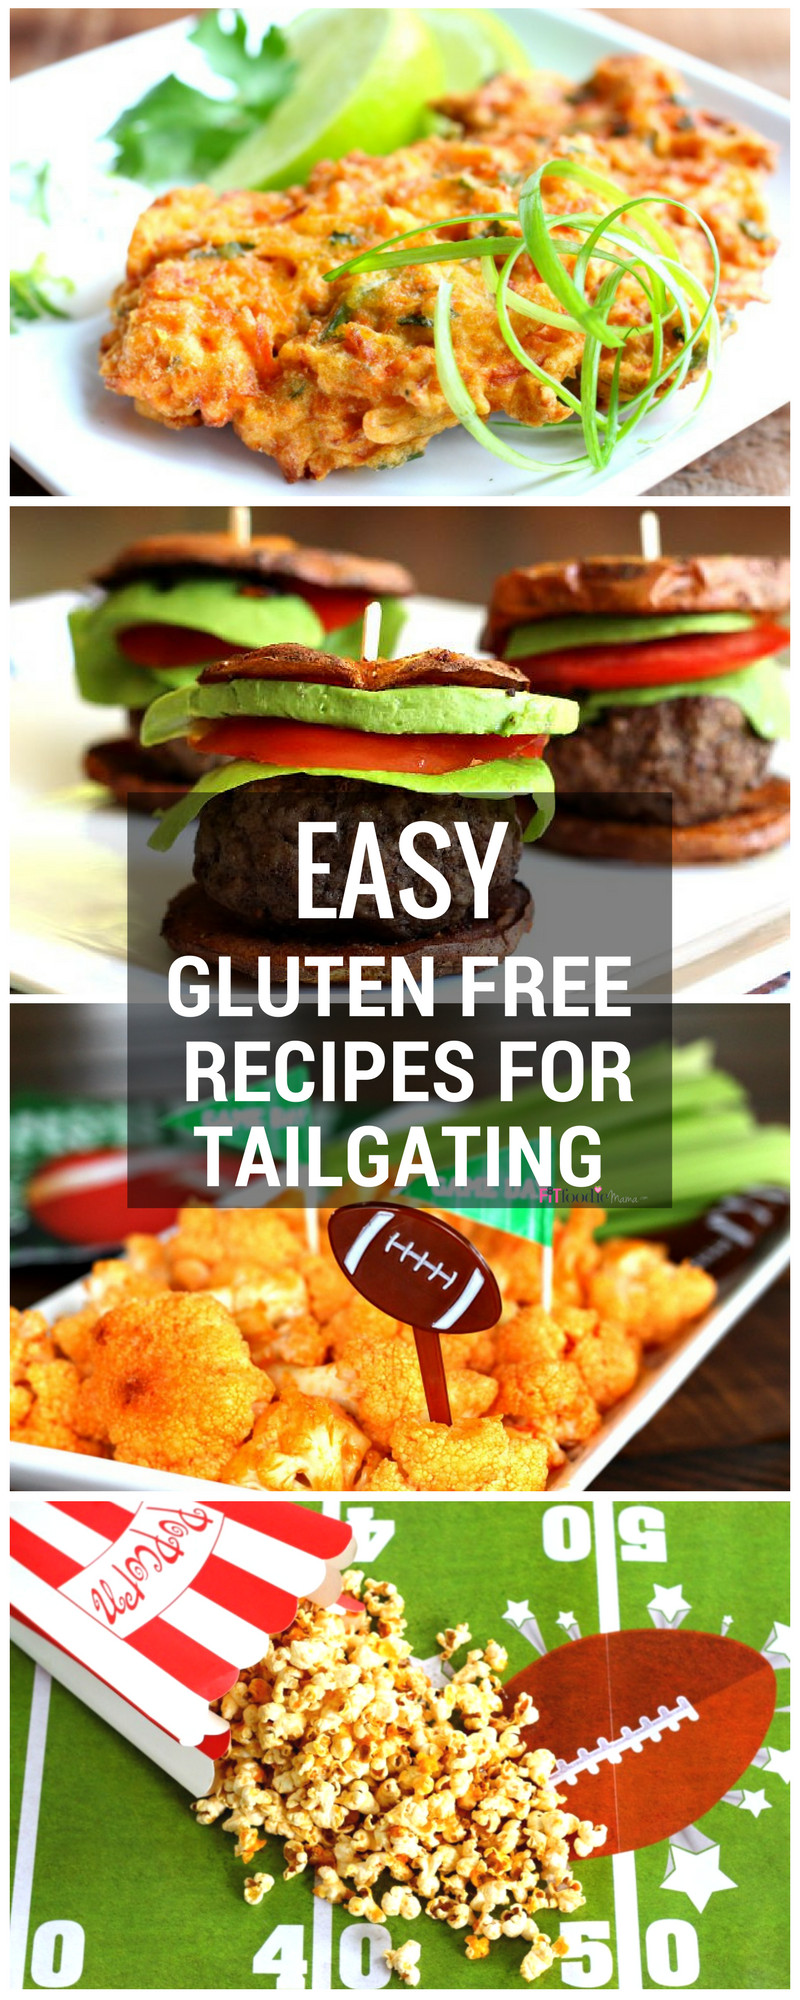 Easy Gluten And Dairy Free Recipes
 Easy Gluten Free Tailgating Recipes for Football Season